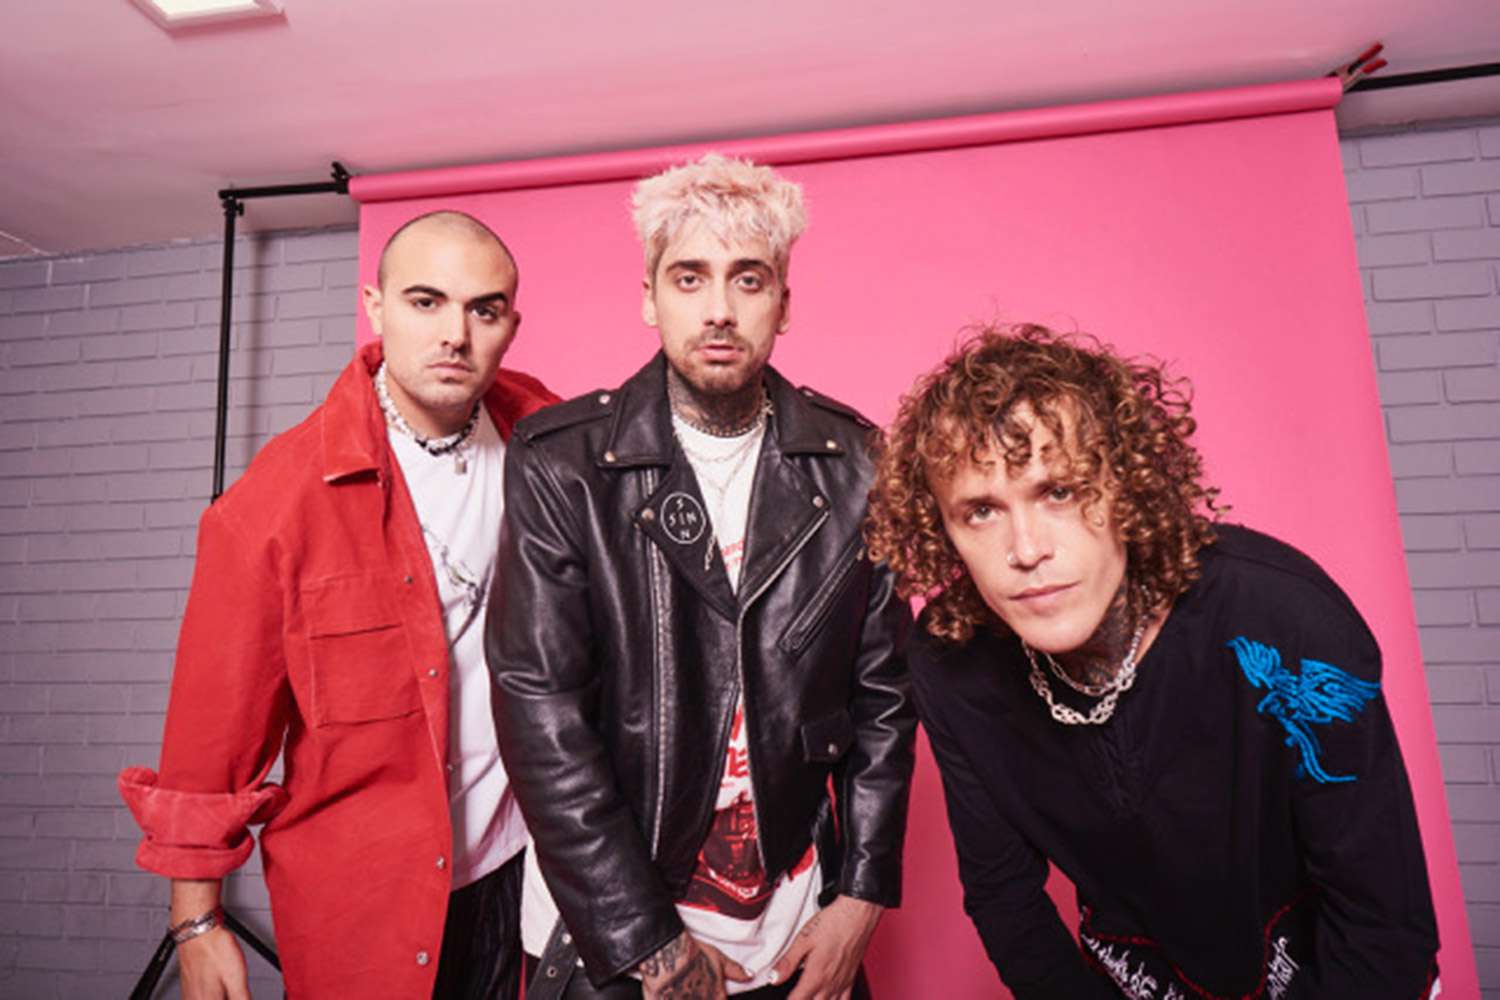 Cheat Codes Release Hellraisers, Pt. 2 as They Talk Musical Evolution Since 'No Promises' Era